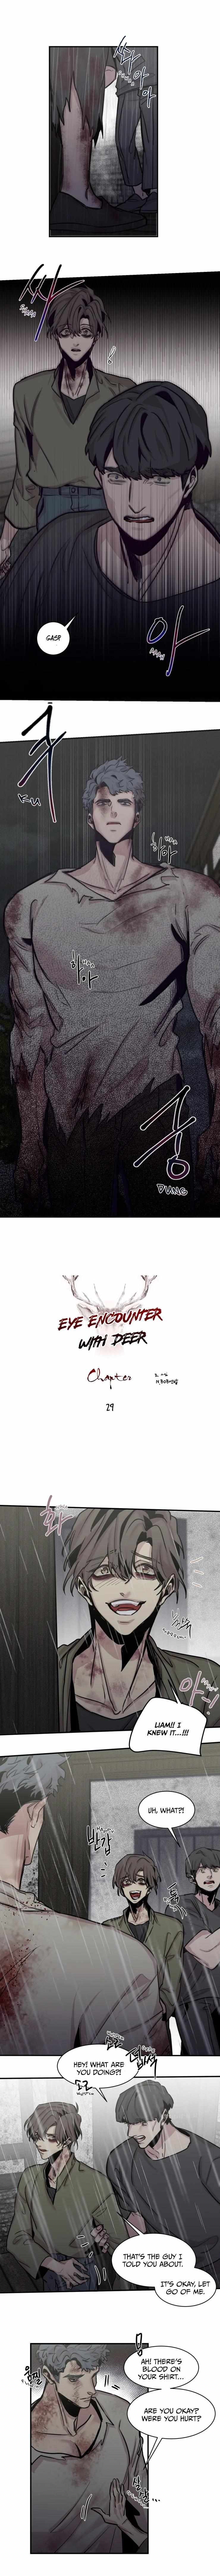 Eye Encounter With The Deer - Page 4